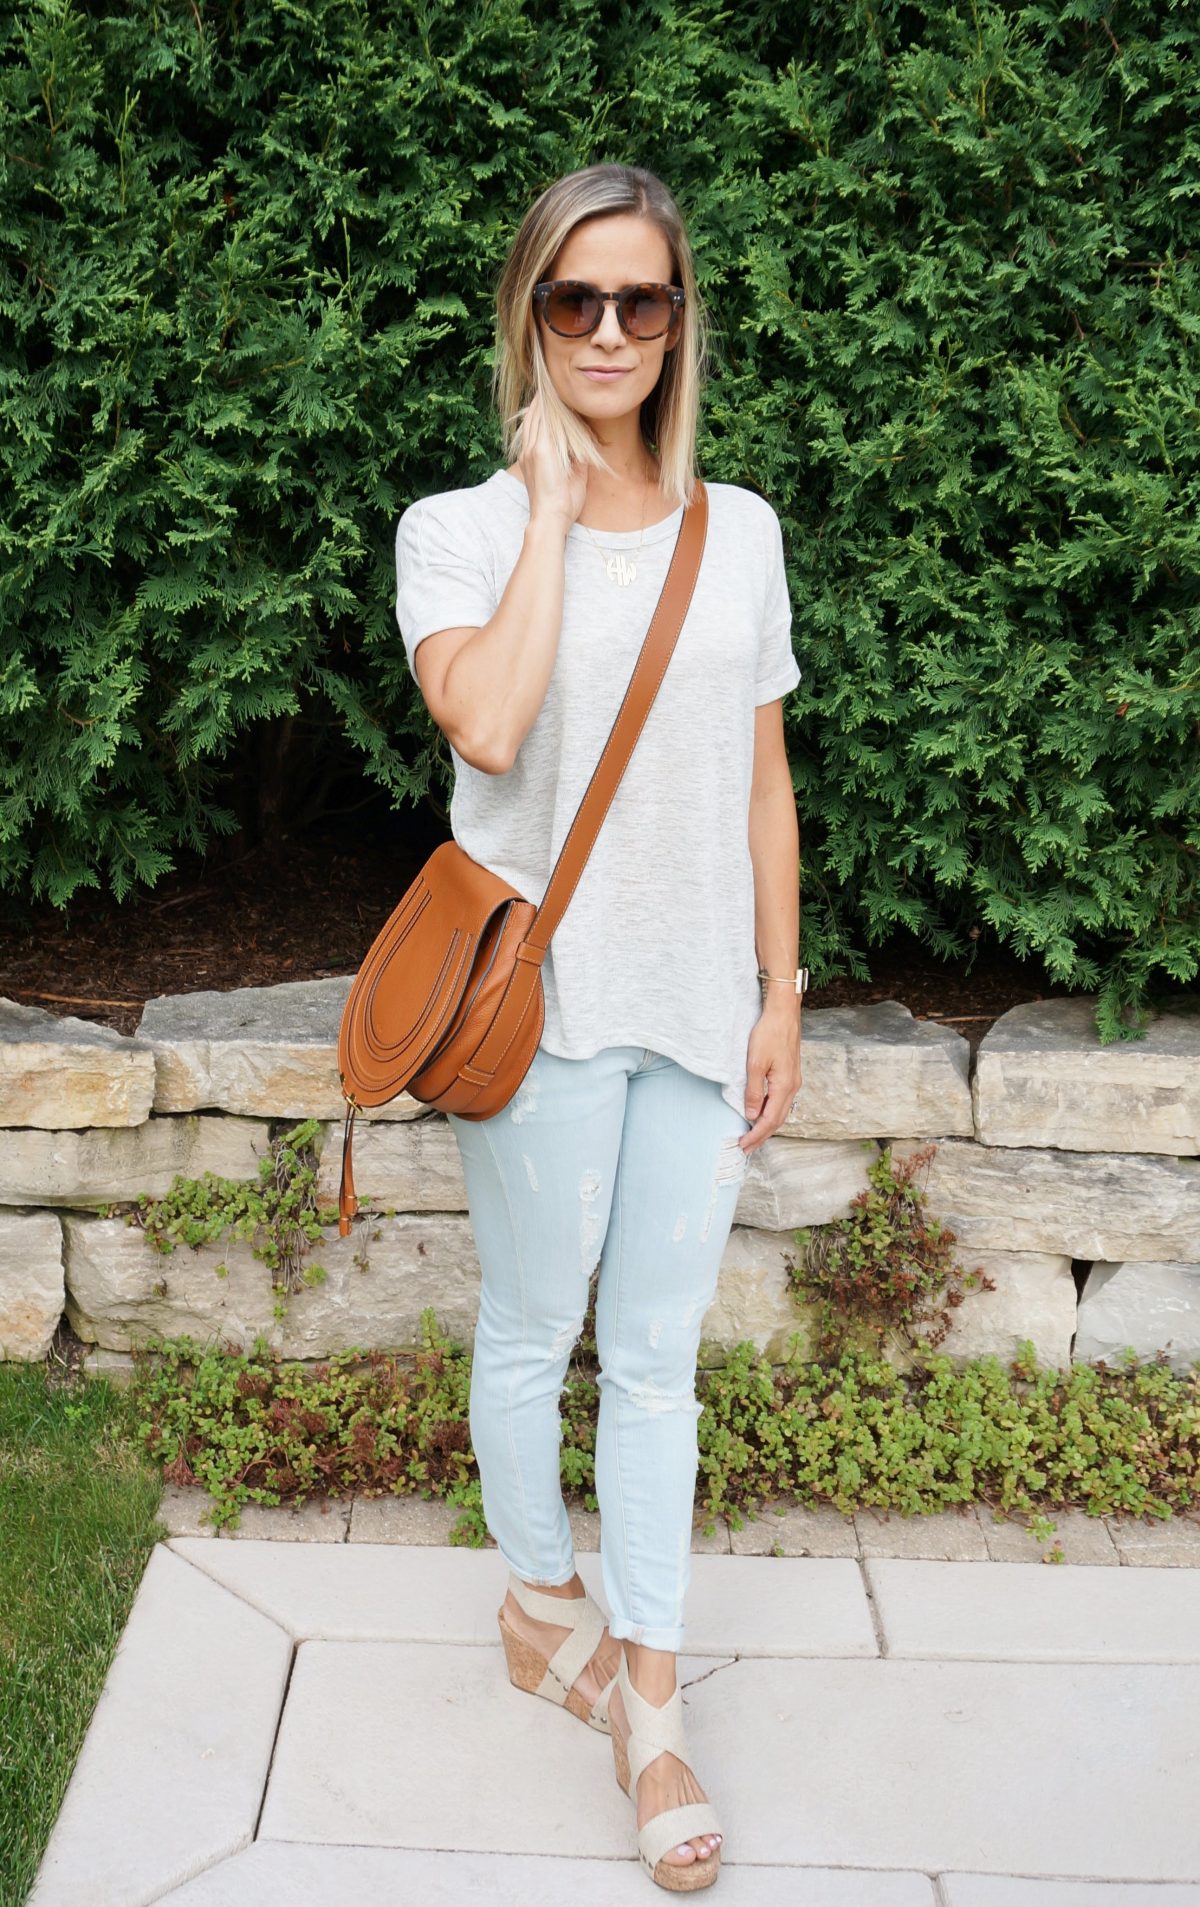 Simple Summer Style: Less Is More - my kind of sweet